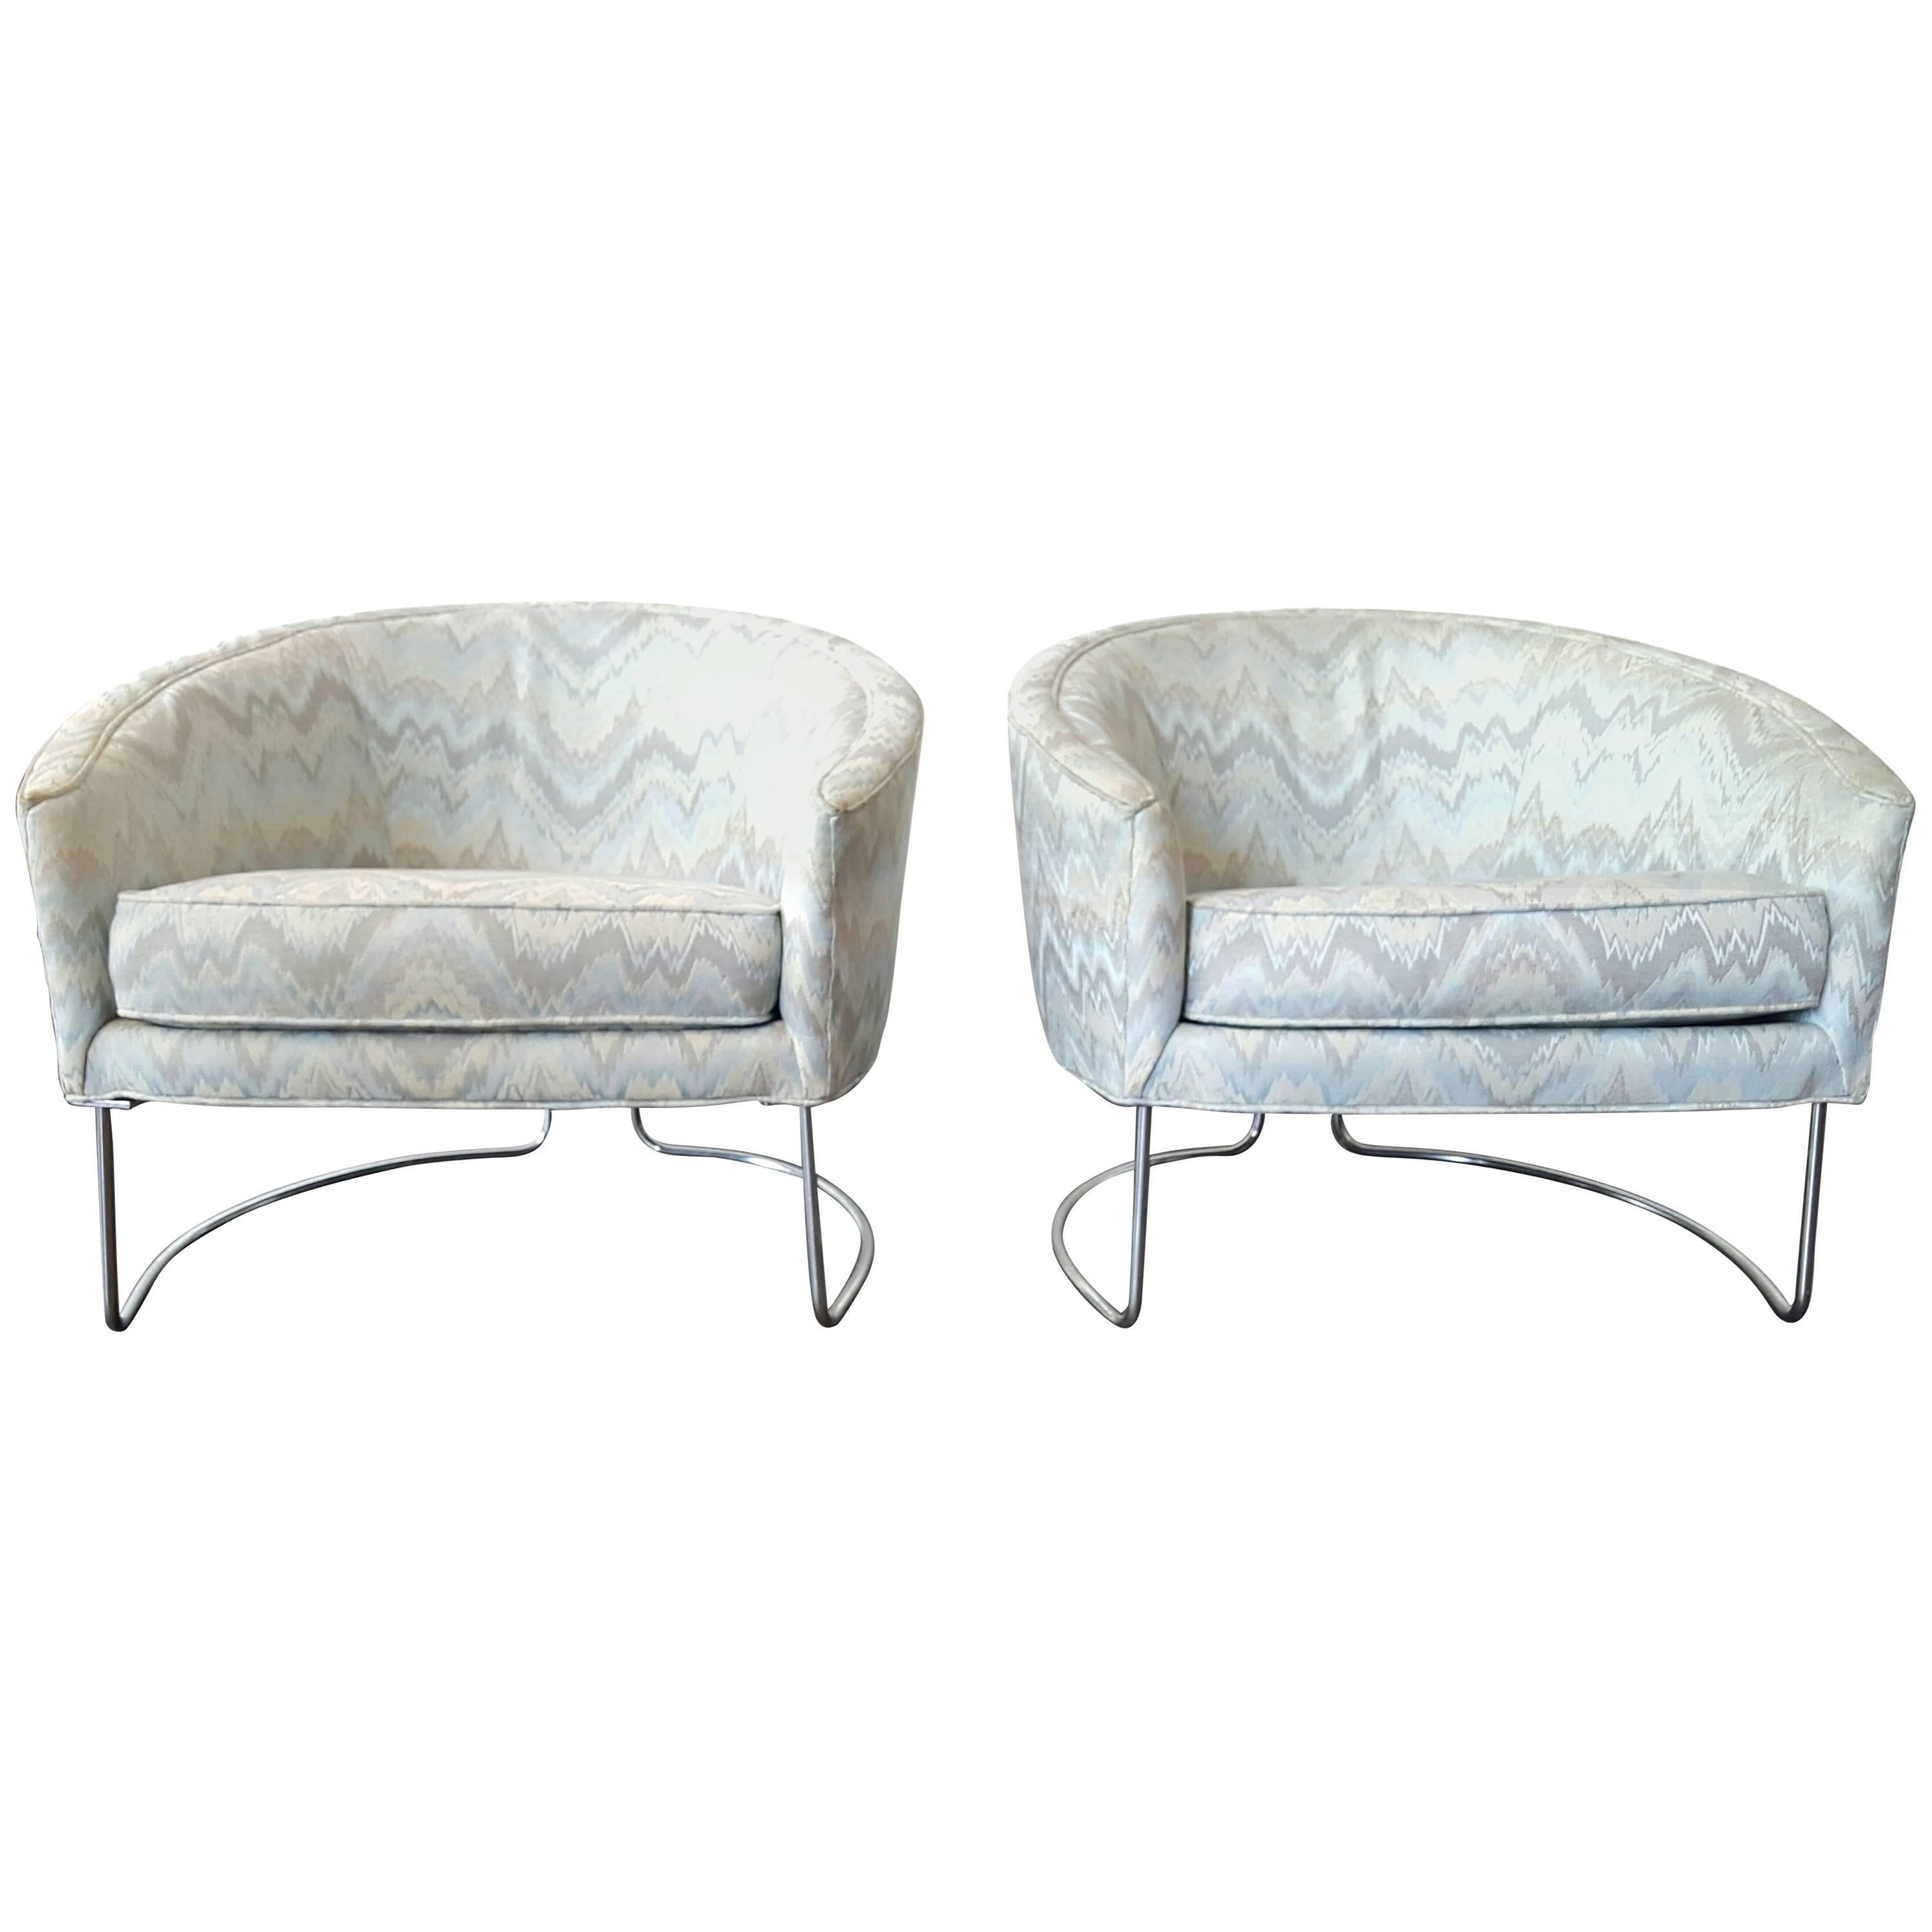 Classic Pair Tub Chairs, Chrome and Fabric by Milo Baughman